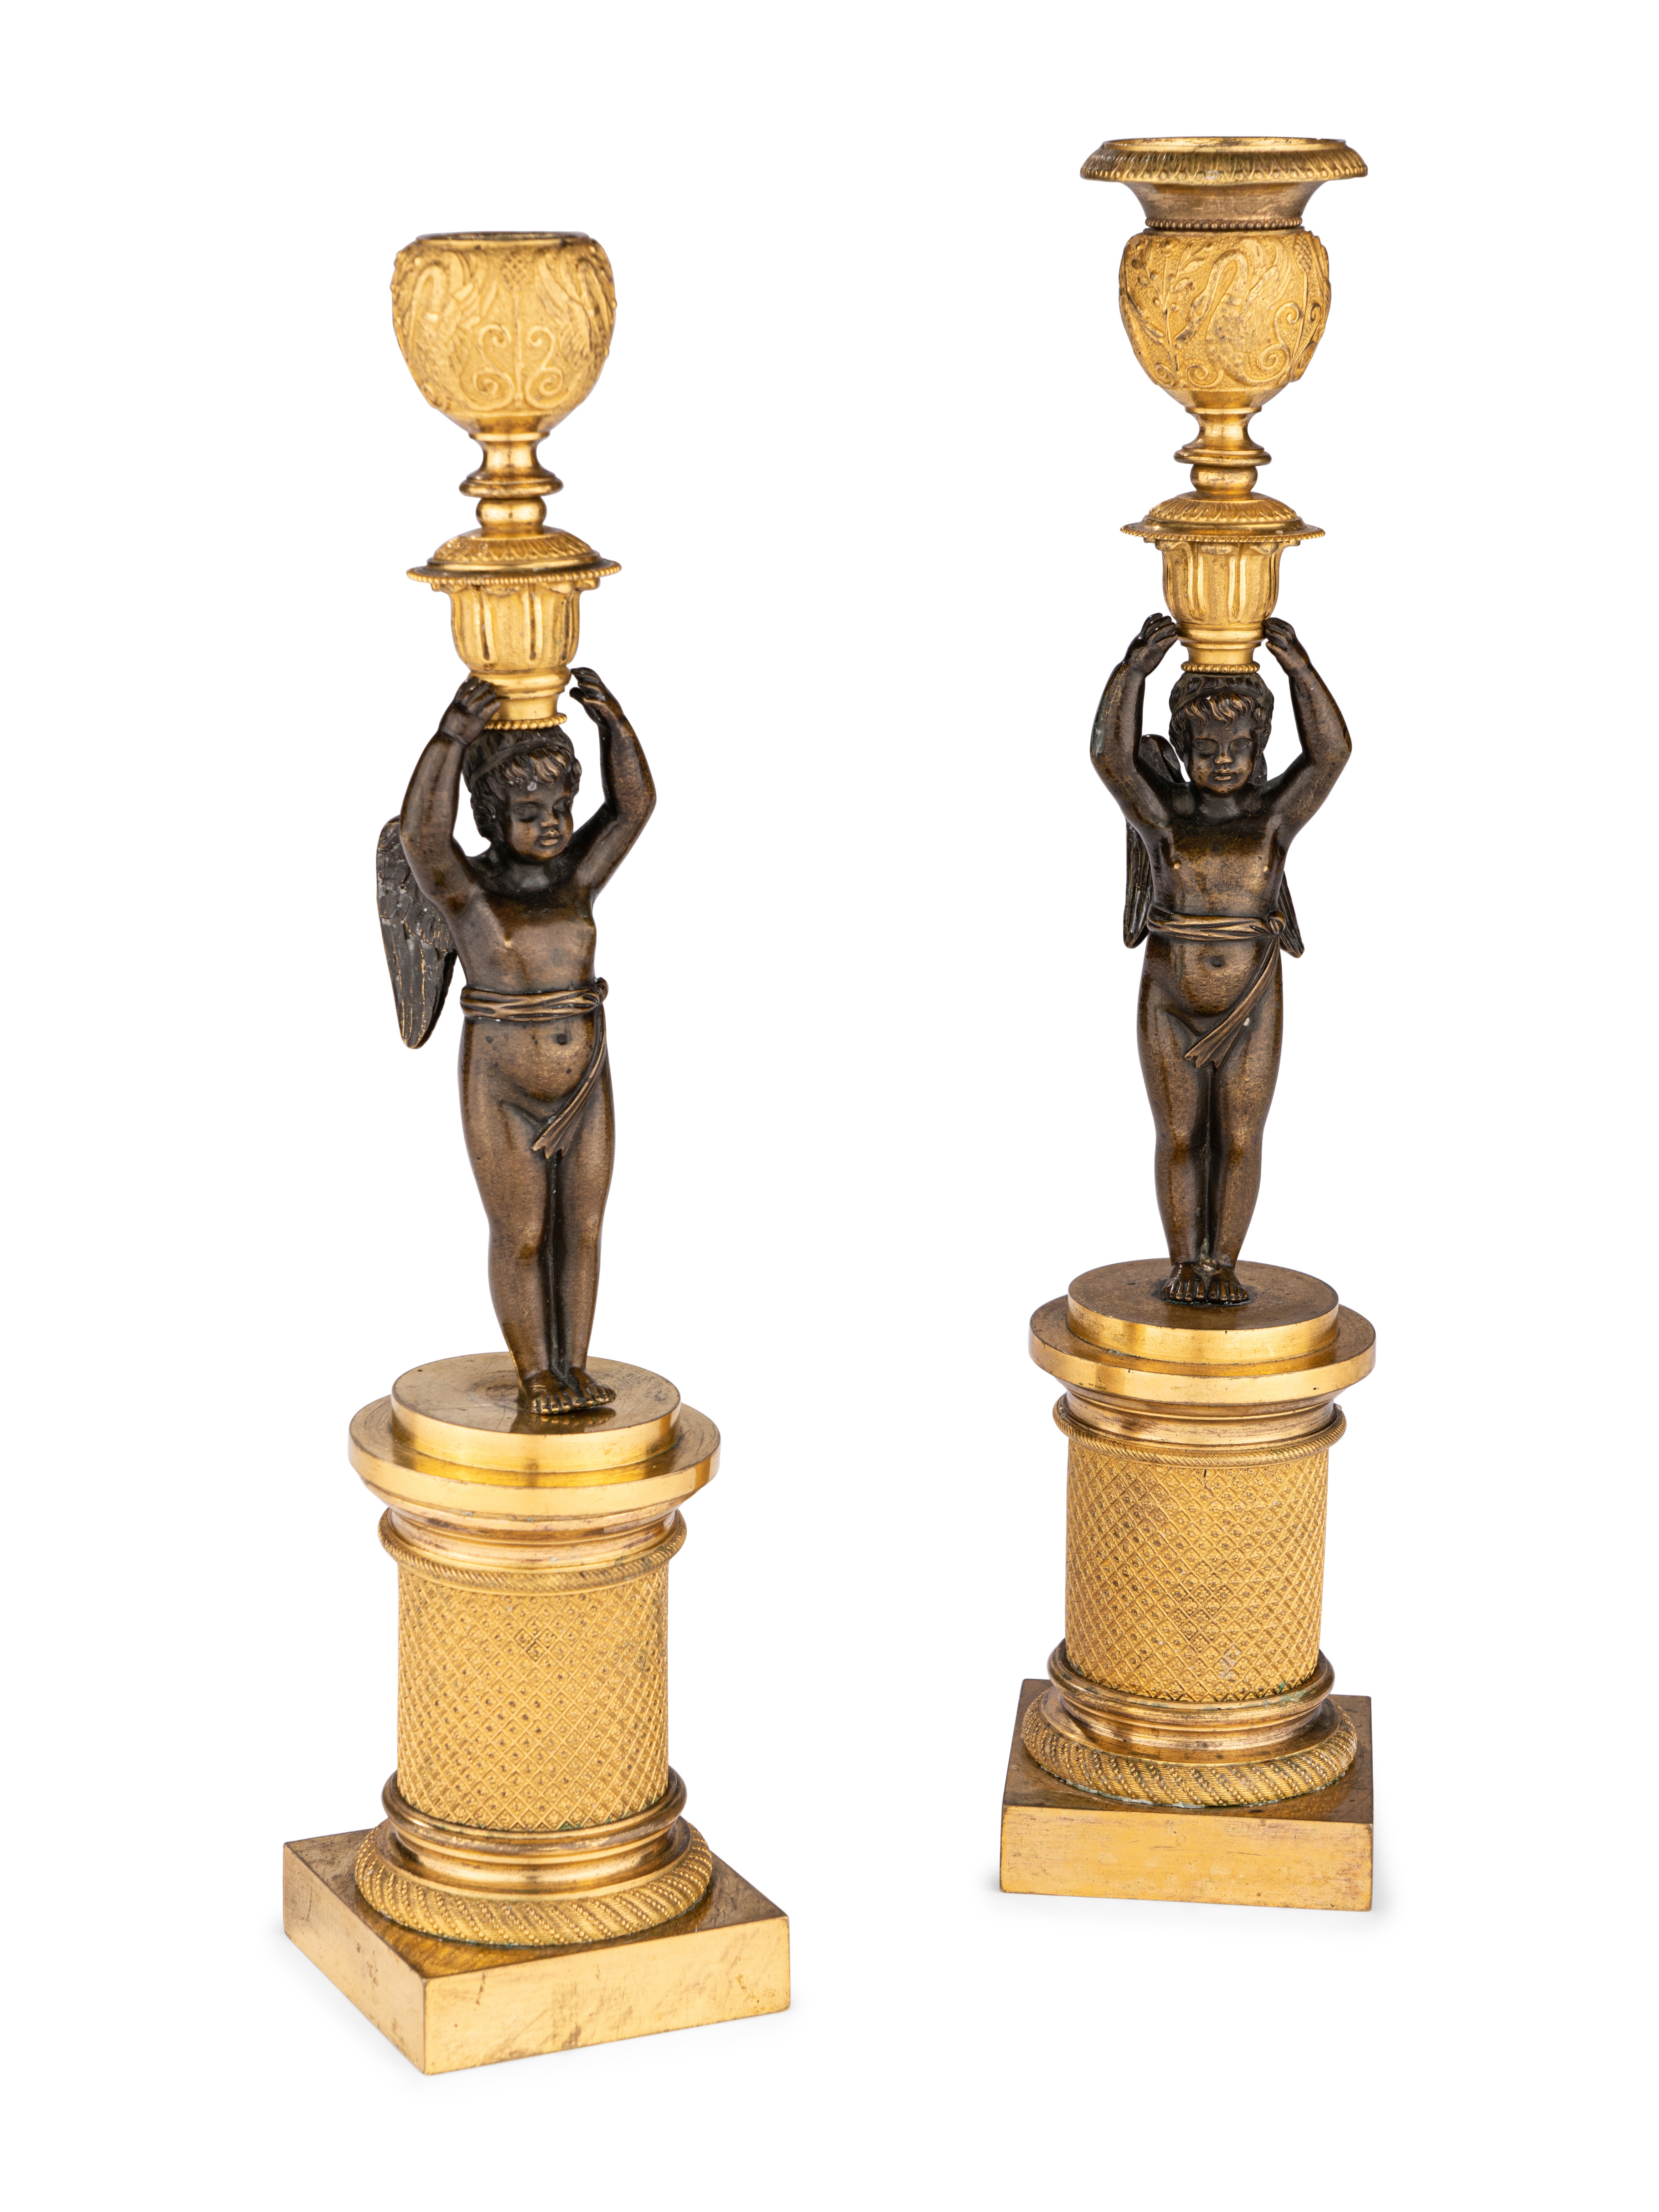 A Pair of Restauration Ormolu and Patinated Bronze Figural Candlesticks - Image 2 of 6